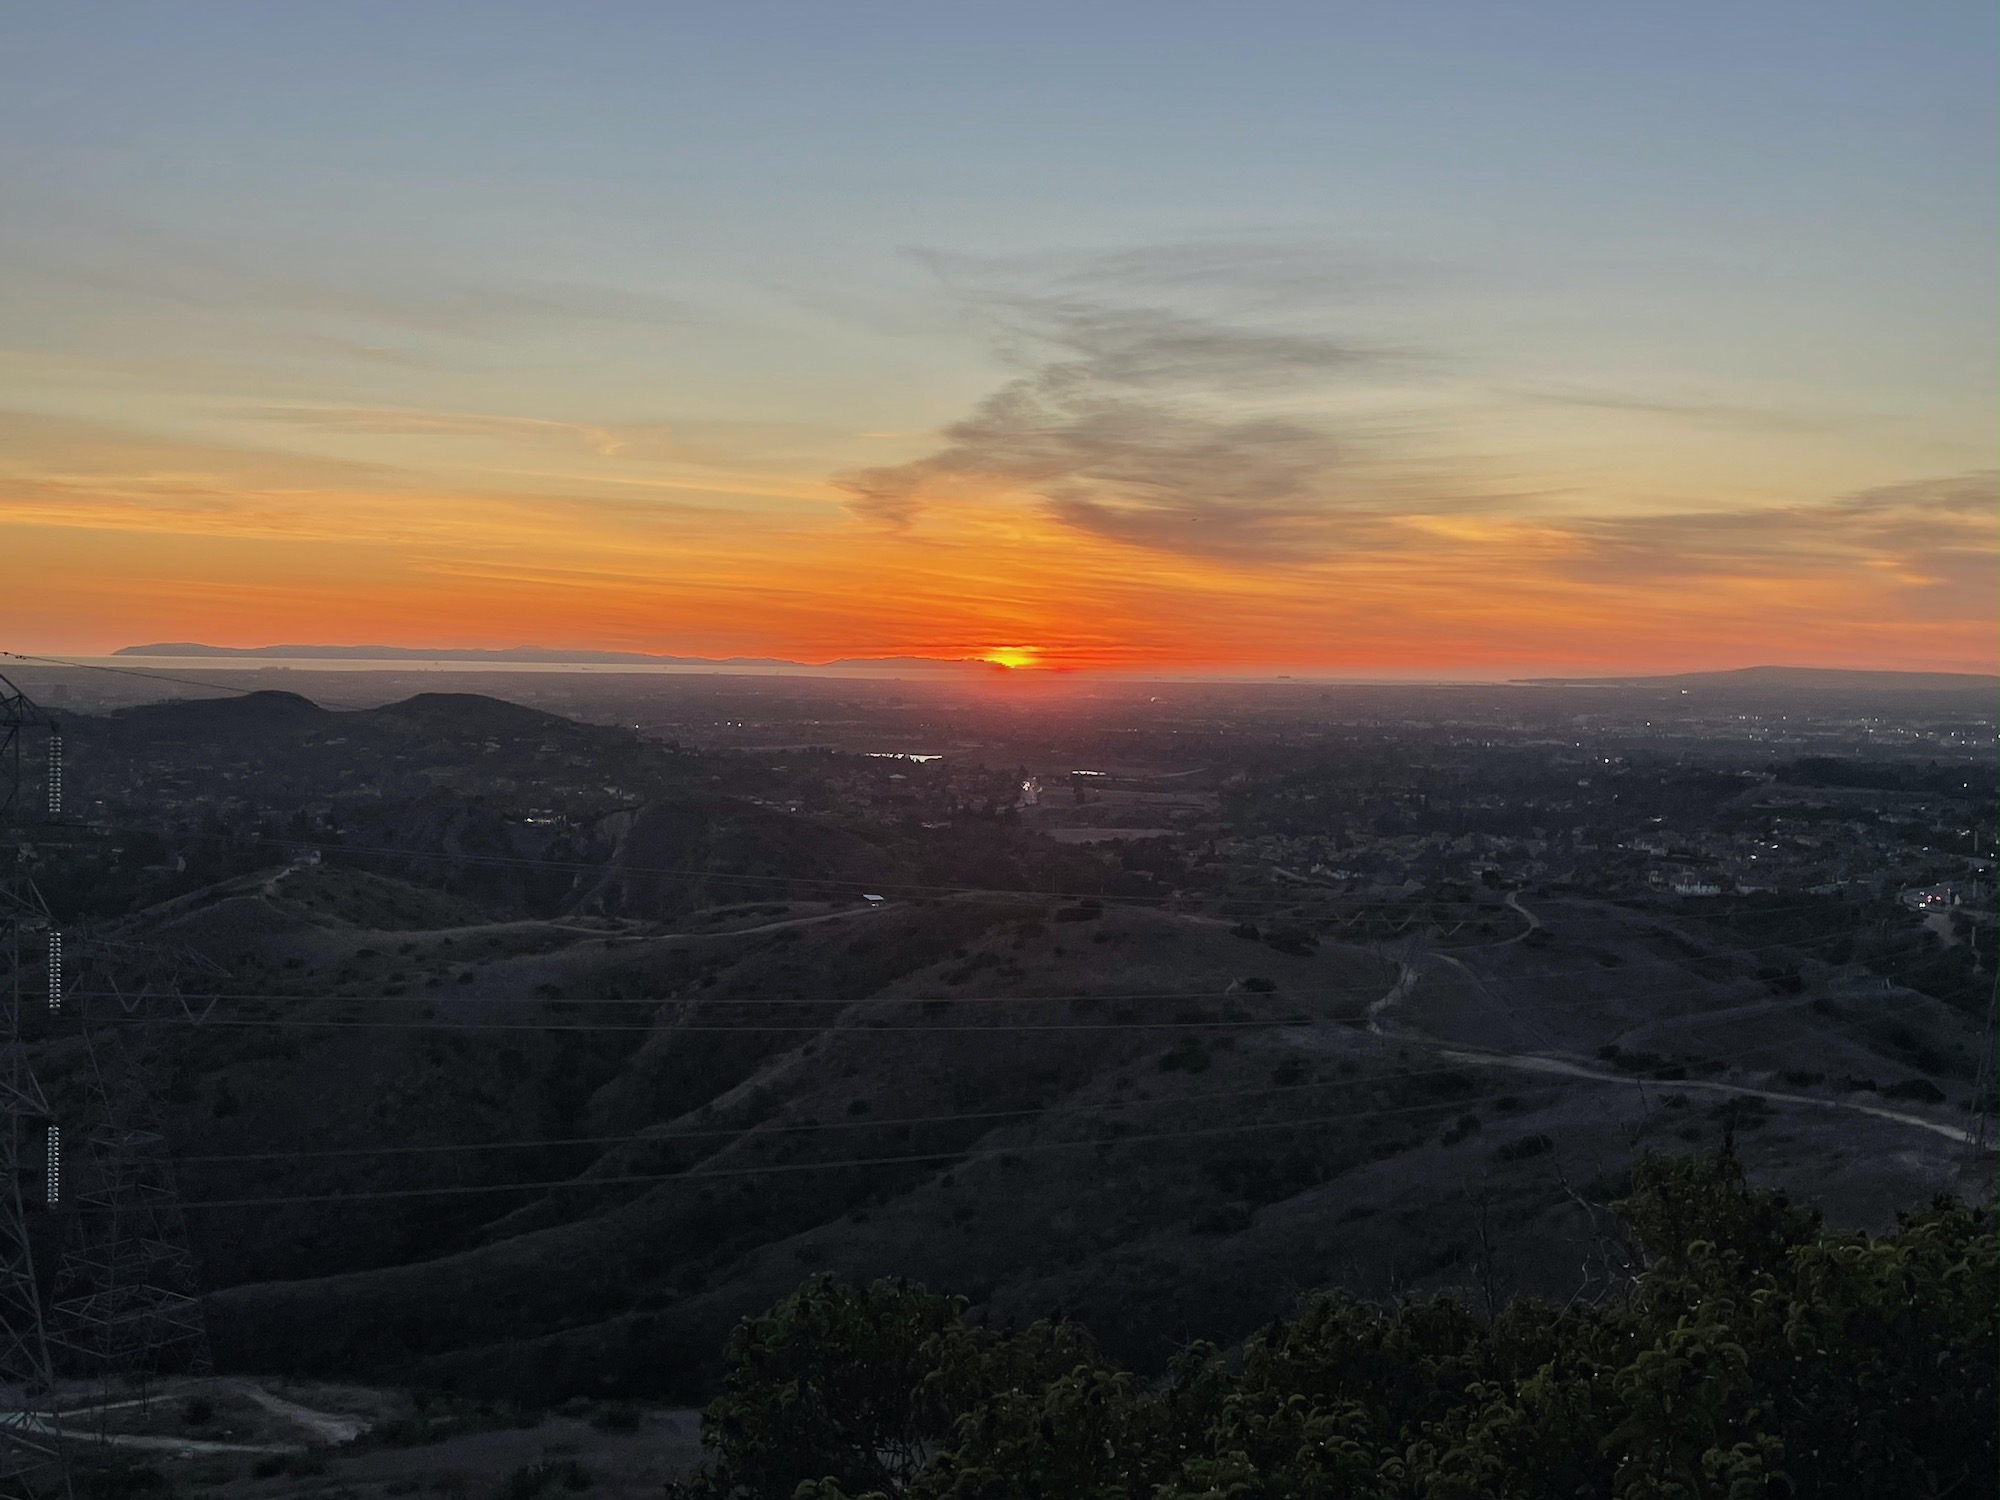 Sunset over pacific ocean - robbers roost vantage point - anaheim hills -25